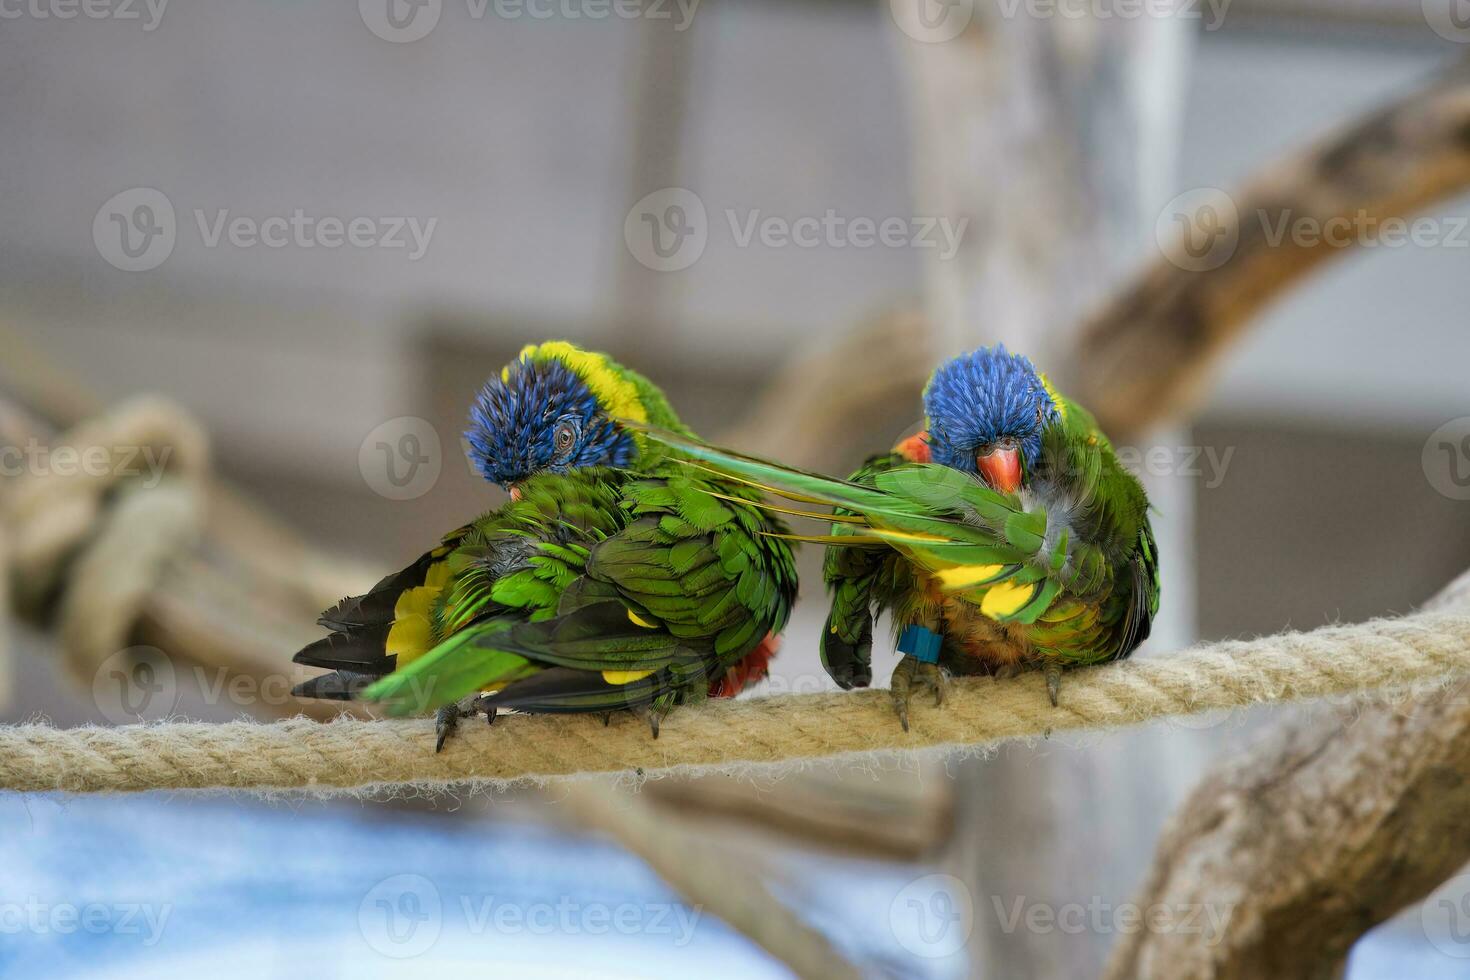 Jardine d'acclimatation, France, Rainbow lorikeet, is a species of parrot found in Australia. It is common along the eastern seaboard, from northern Queensland to South Australia. photo